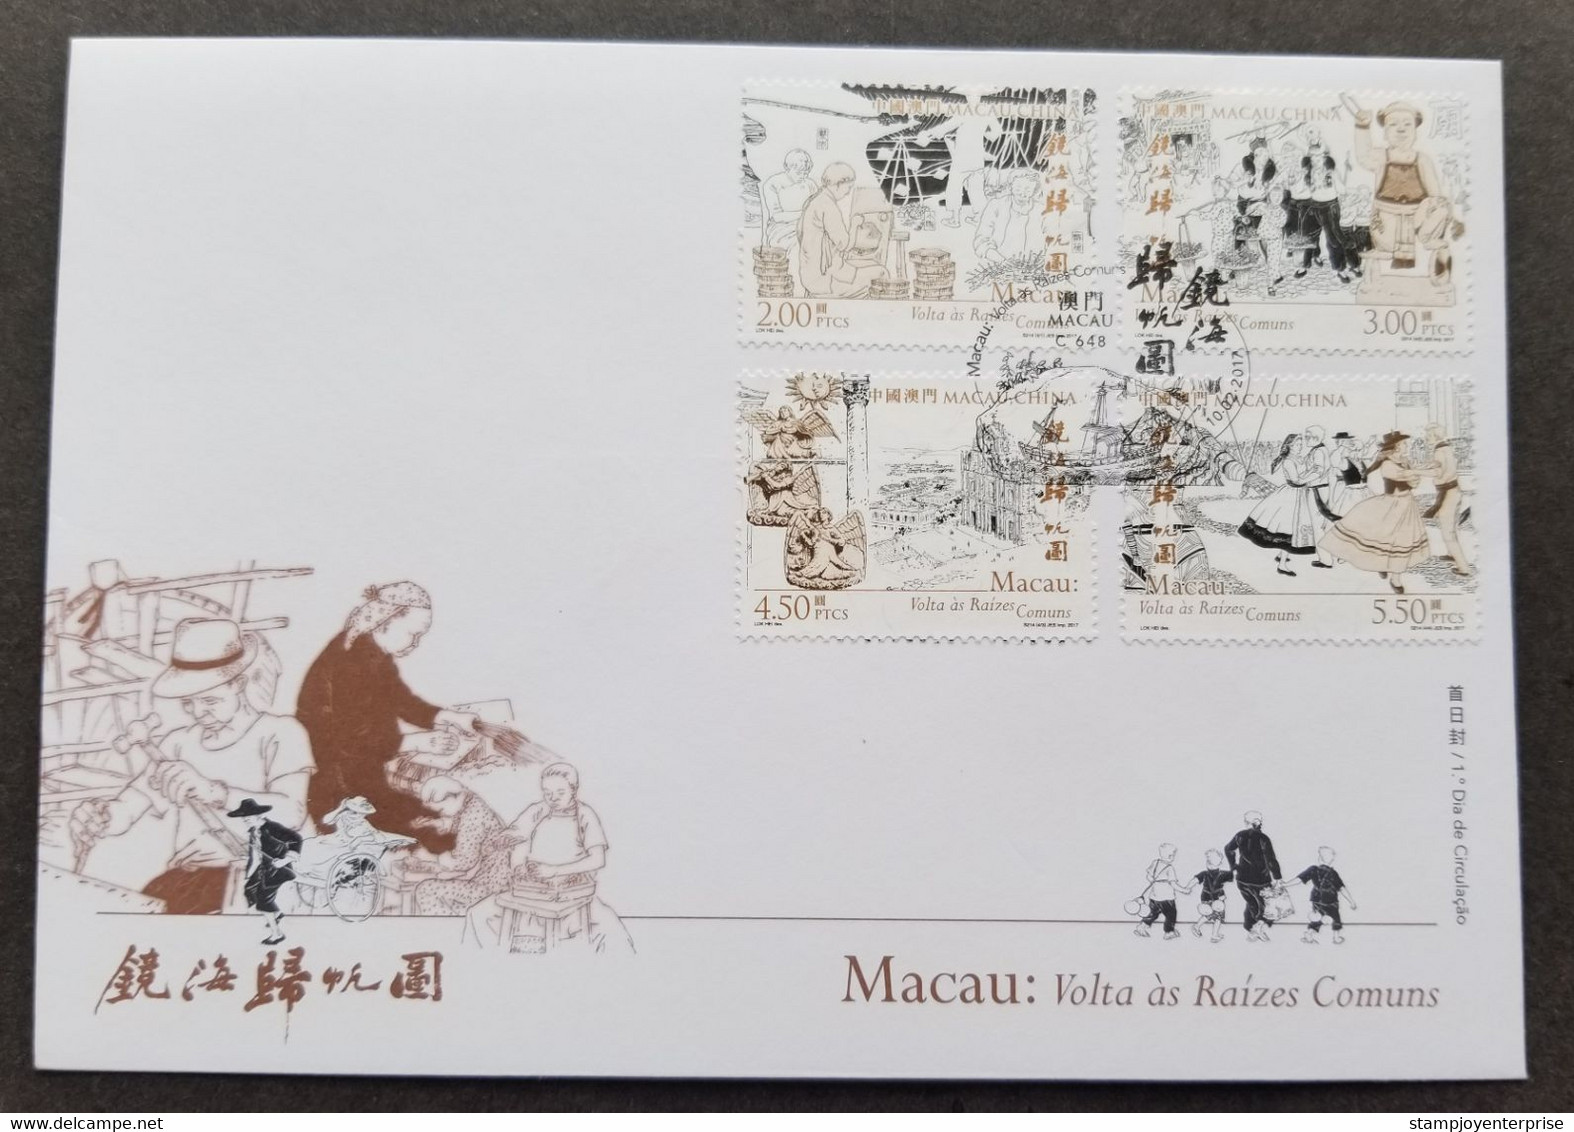 Macau Macao Back To Common Roots 2017 Dance Church Temple Painting Craft (FDC) - Covers & Documents